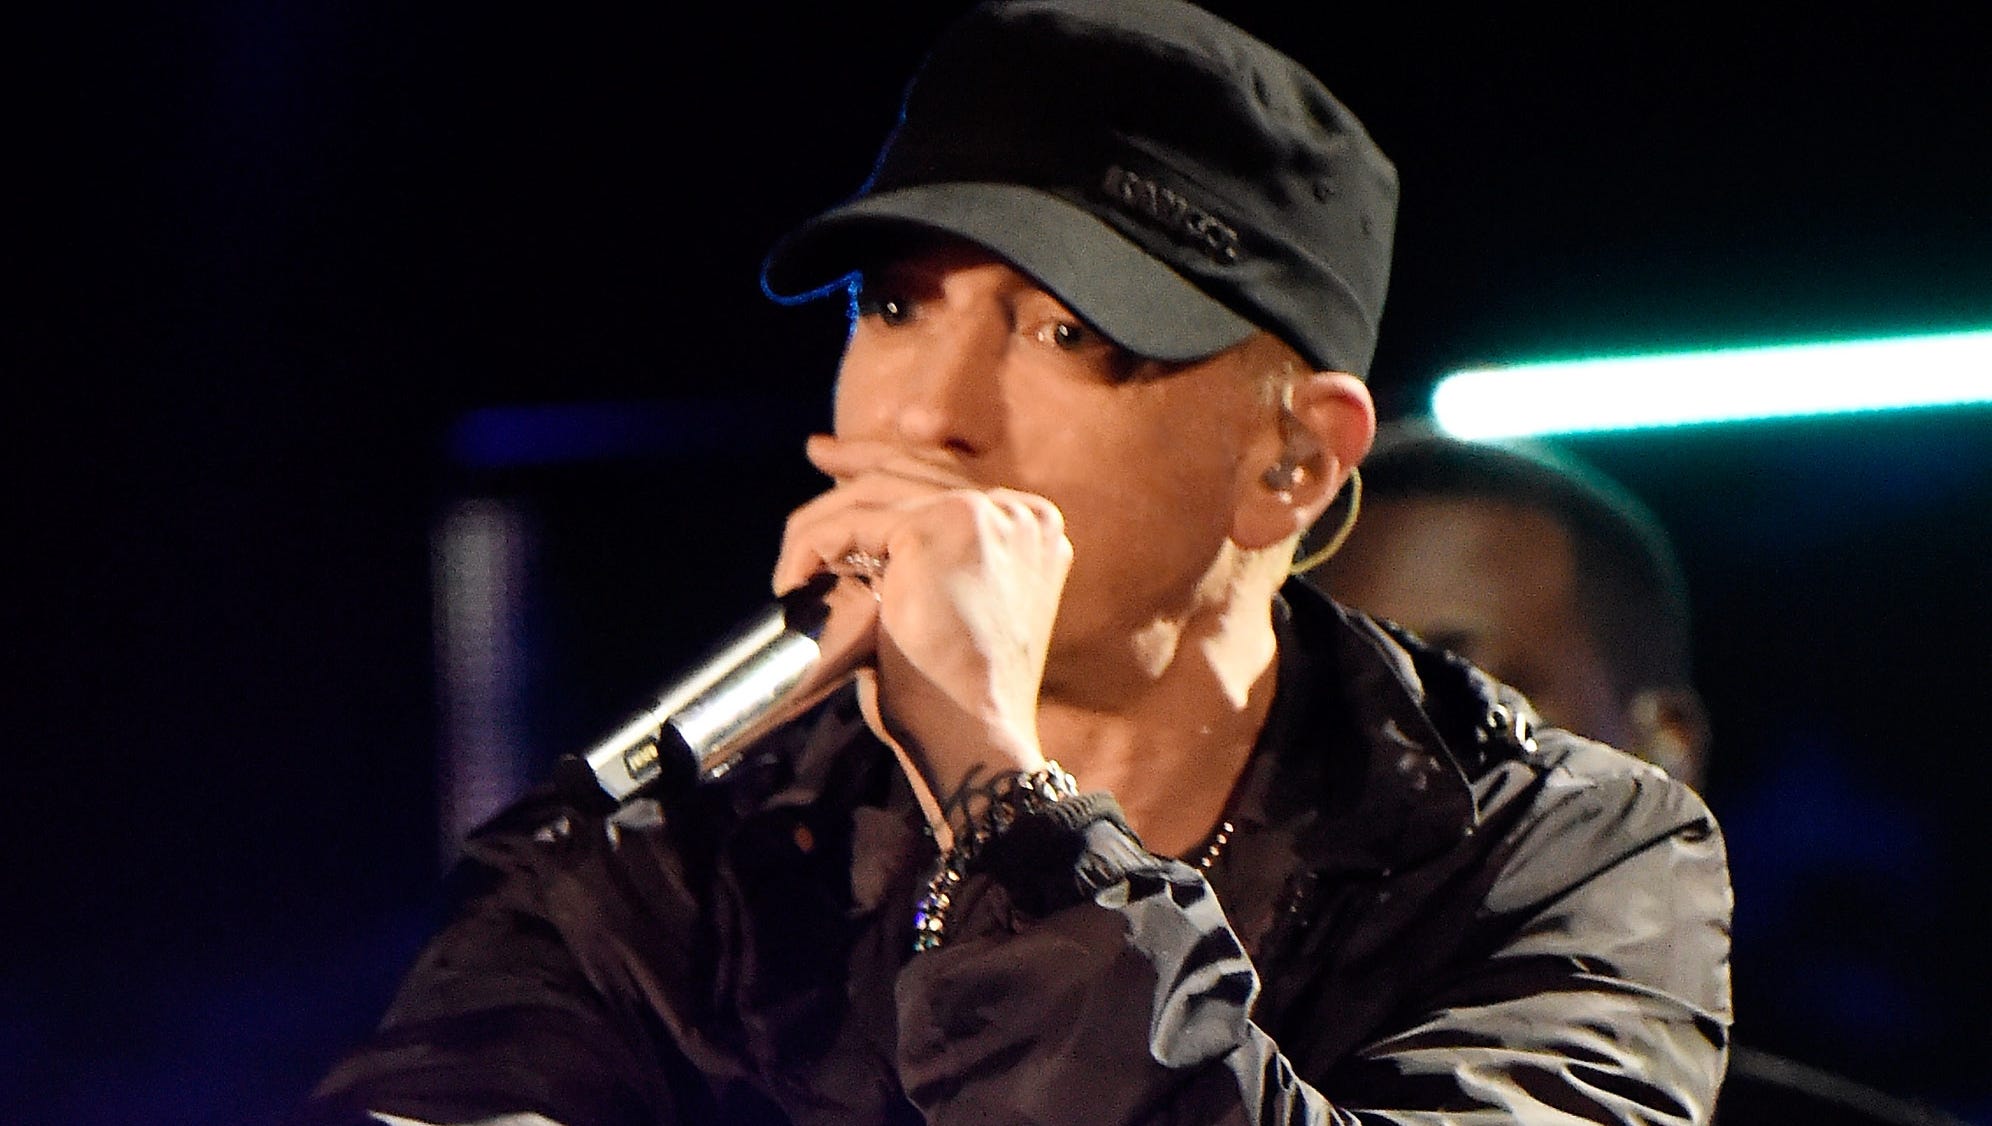 Eminem wins 'Lose Yourself' copyright suit in New Zealand